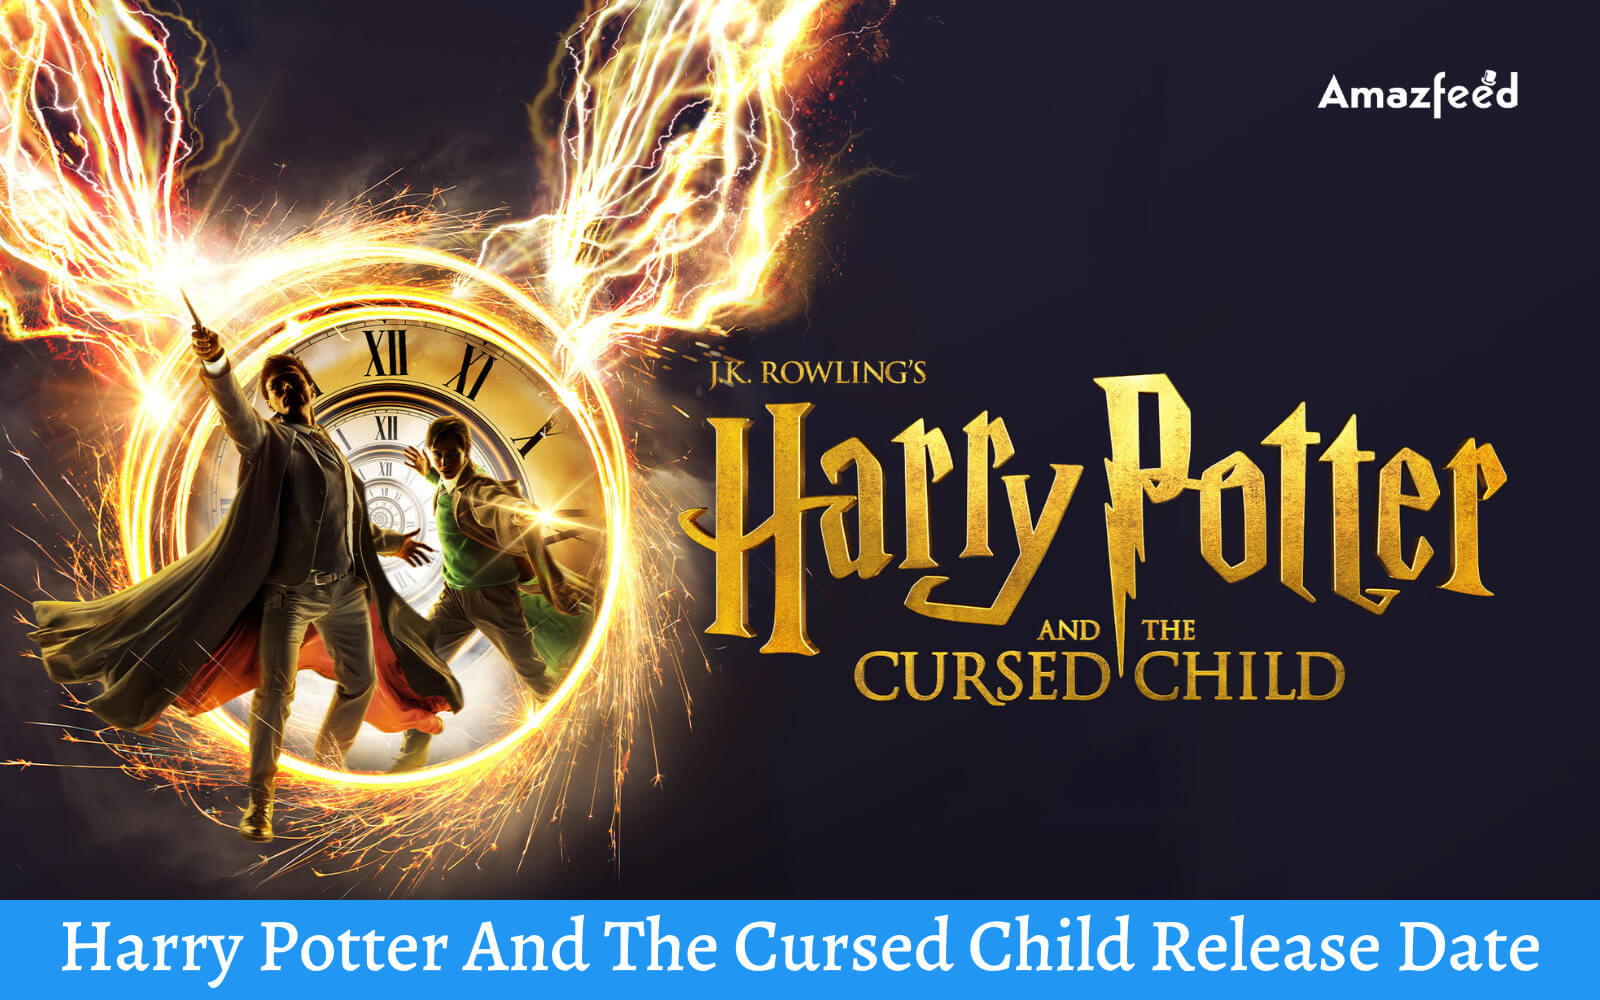 Harry Potter And The Cursed Child Release Date